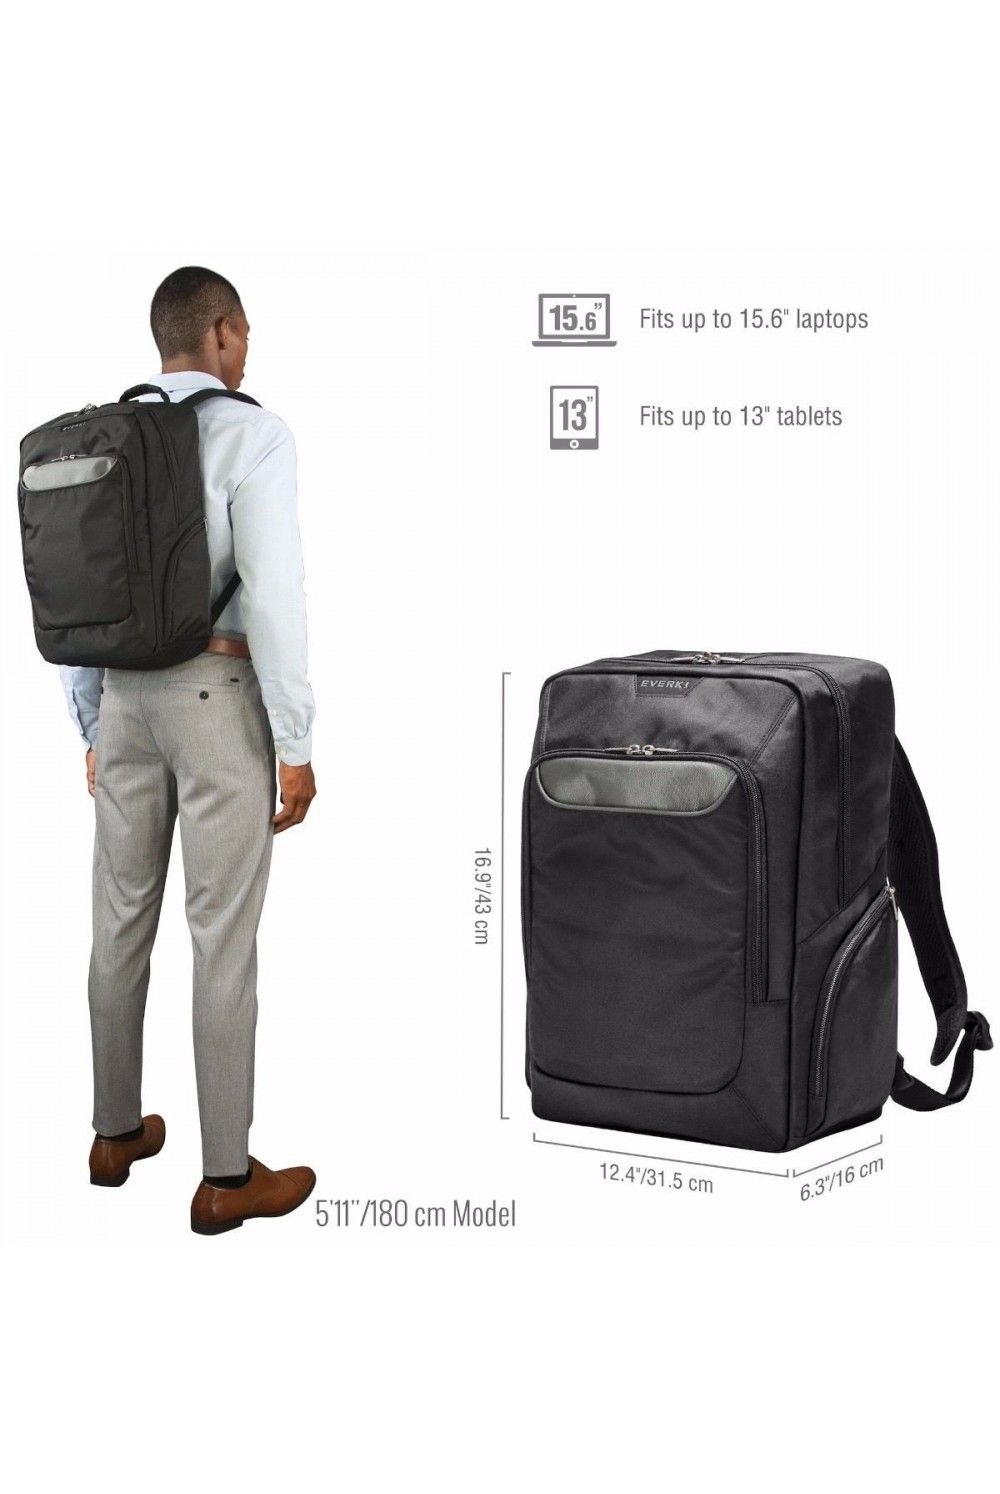 Laptop backpack Advance Everki 15.6 inches